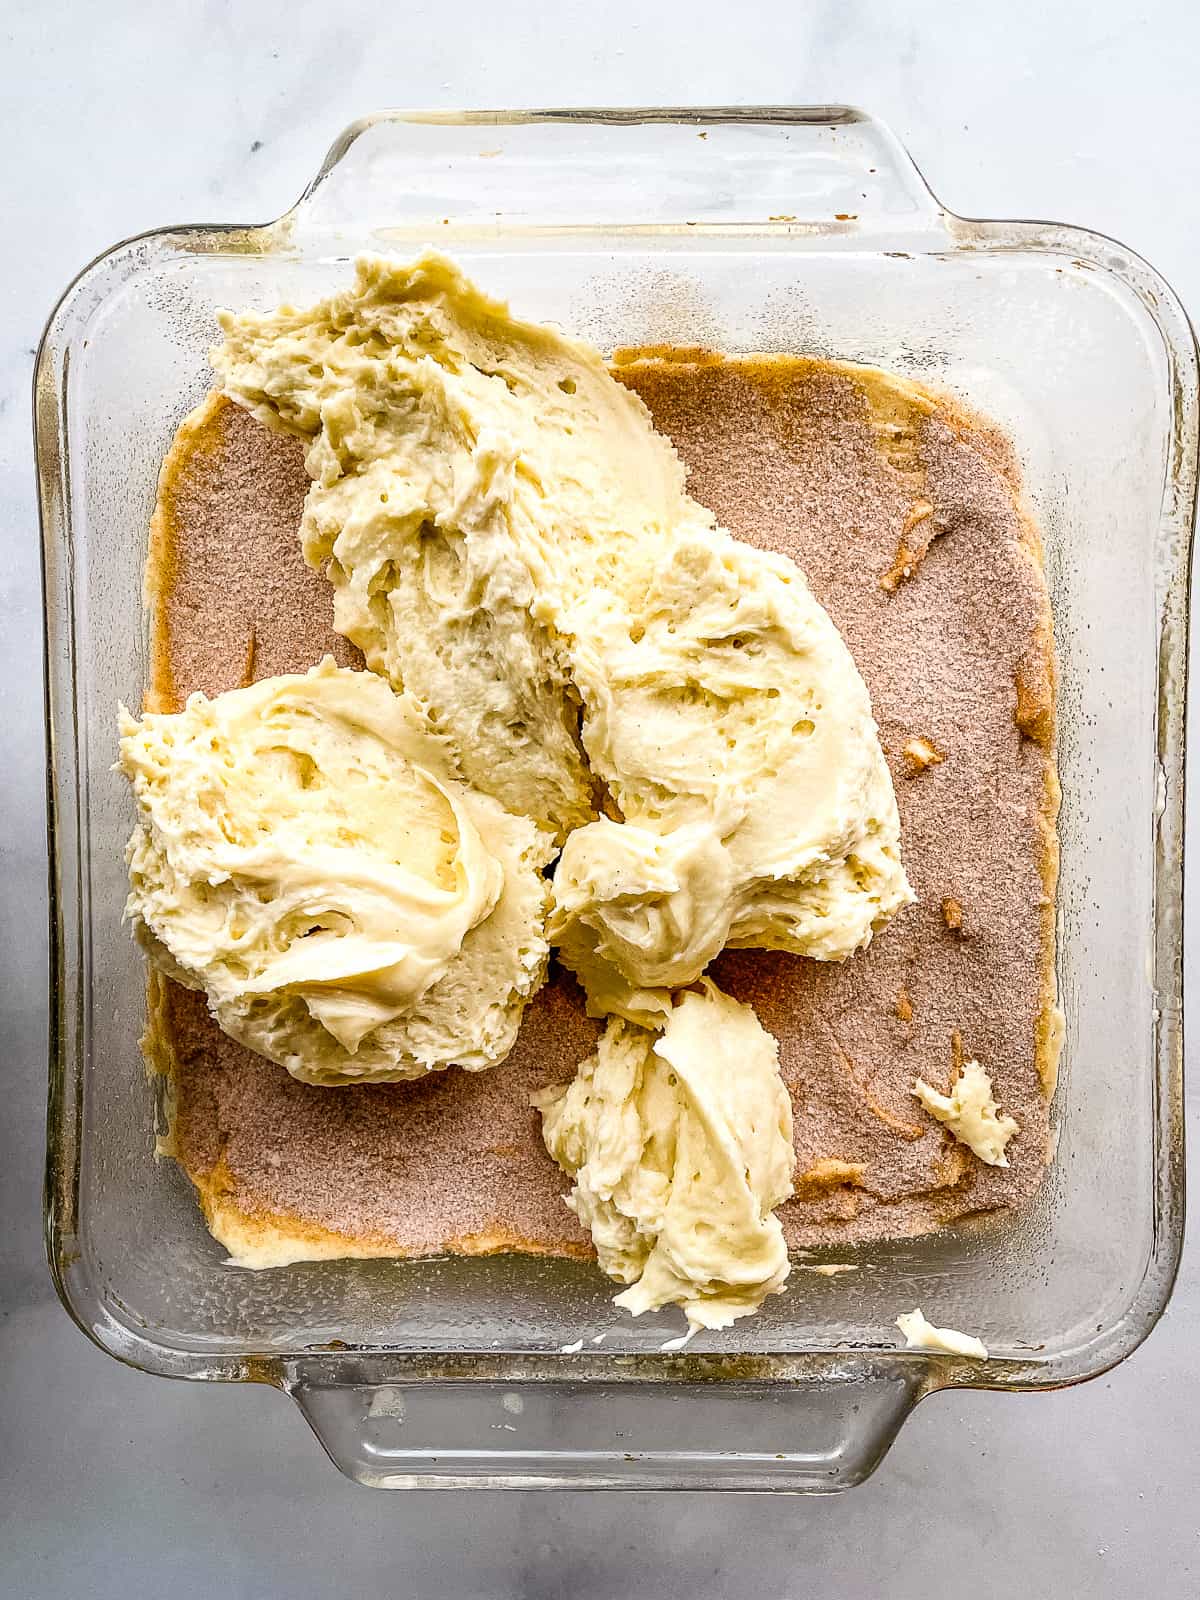 Gluten-free coffee cake batter and filling in a cake pan.